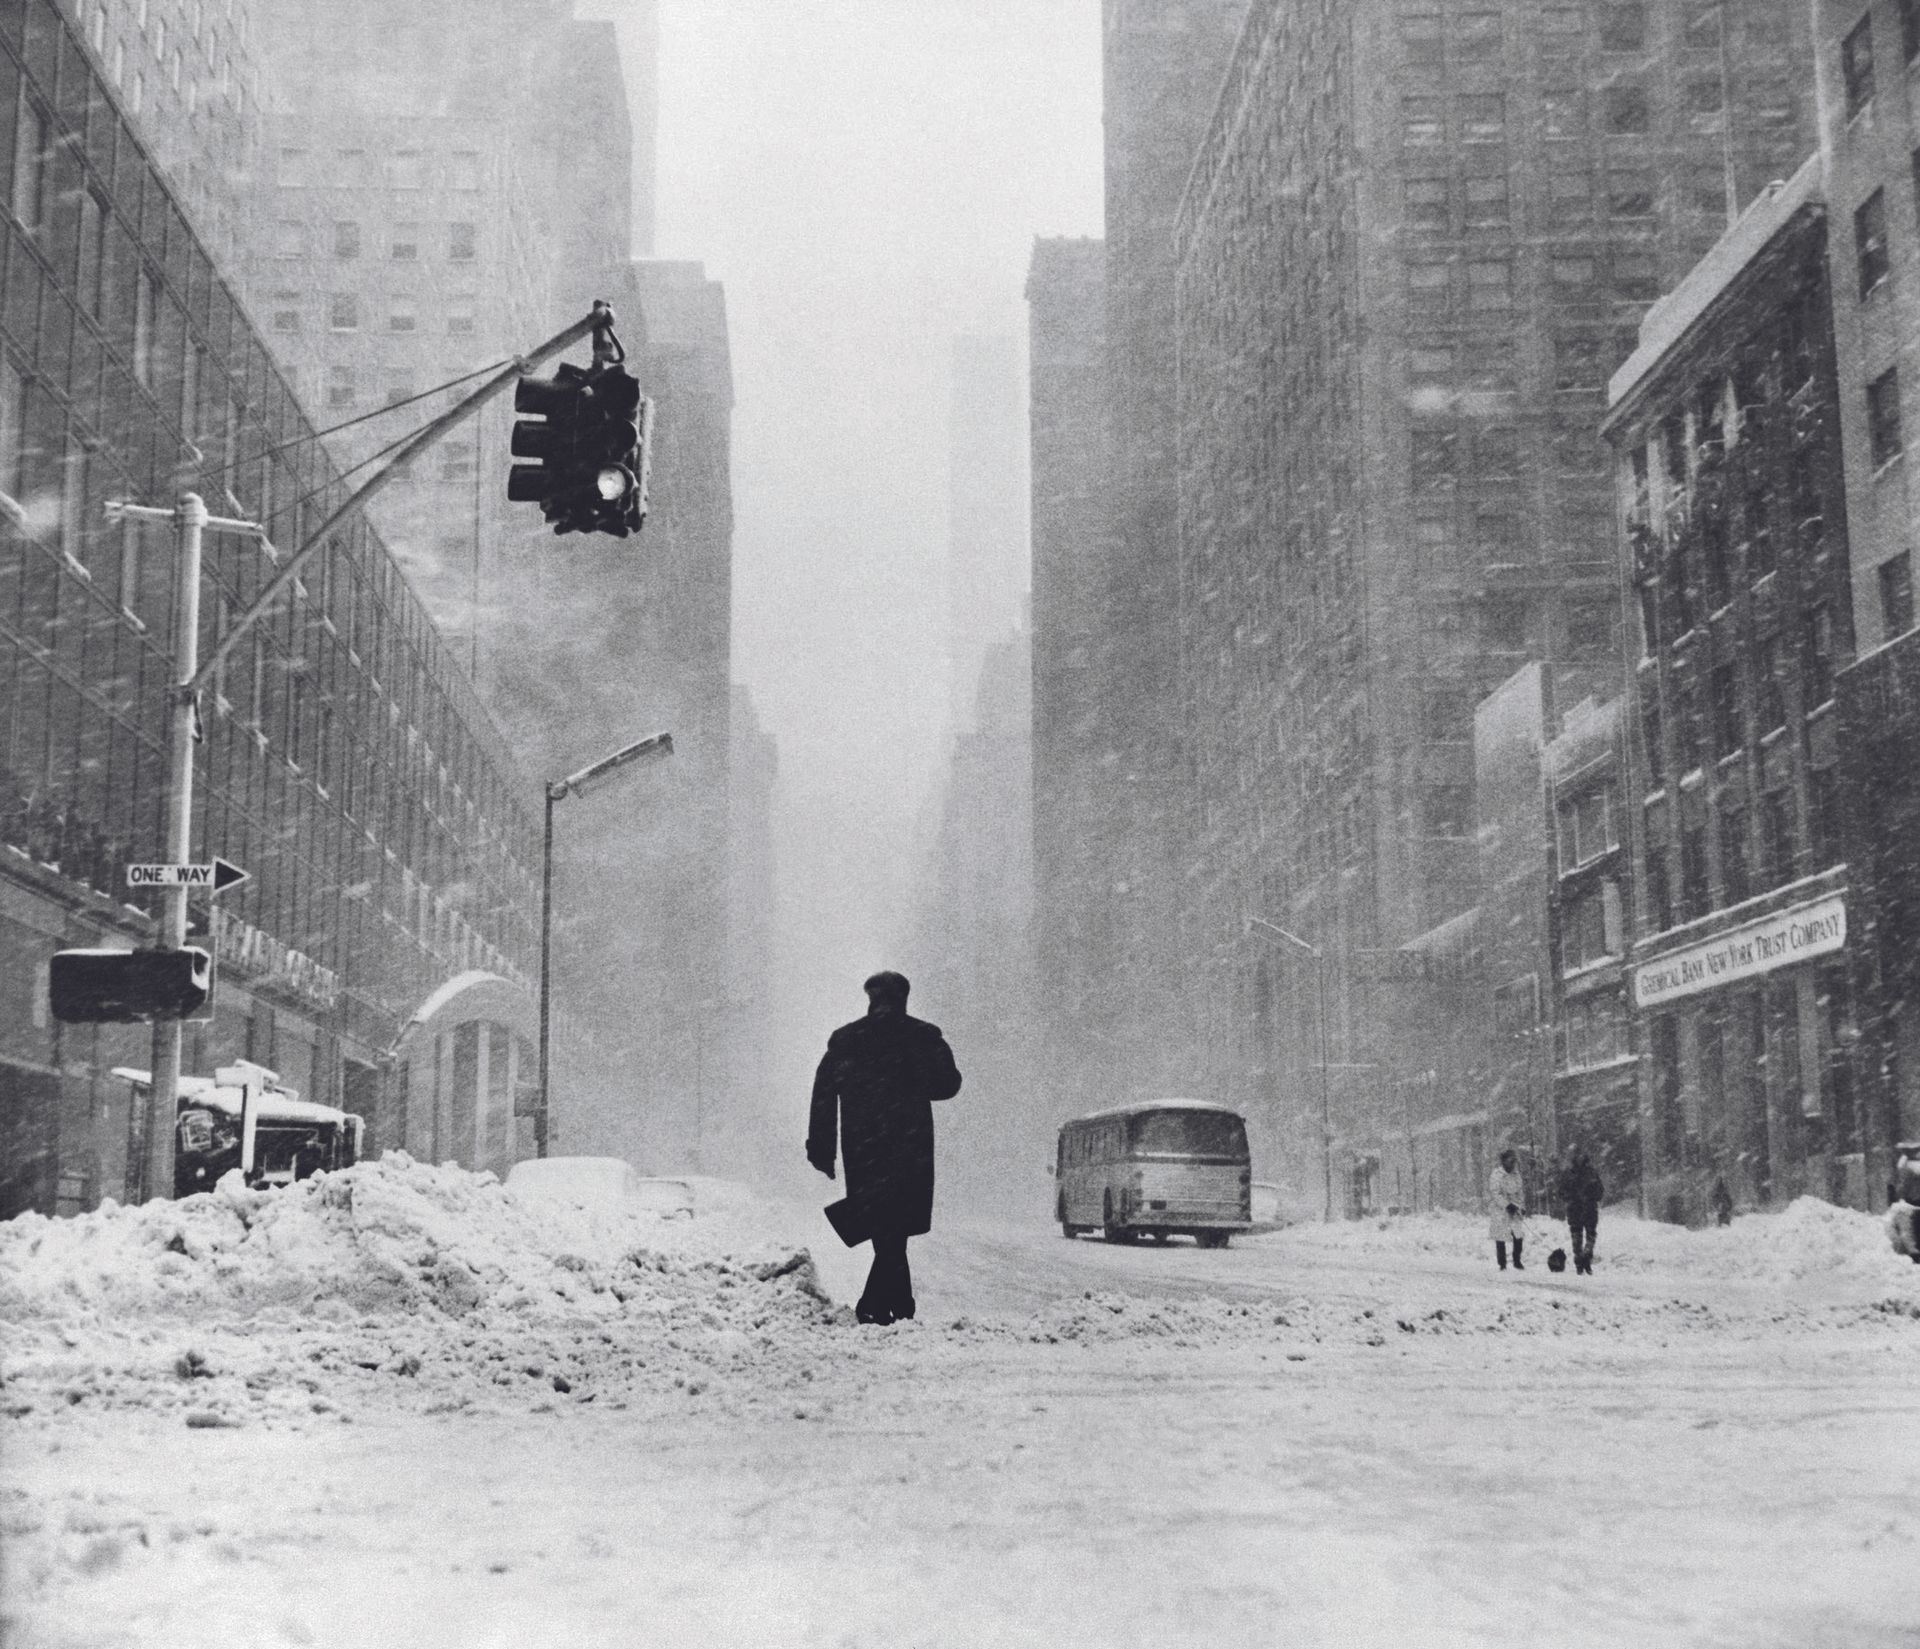 AFP AFP

Walker in the streets of New York covered by snow on February 6th, 1961&hellip;